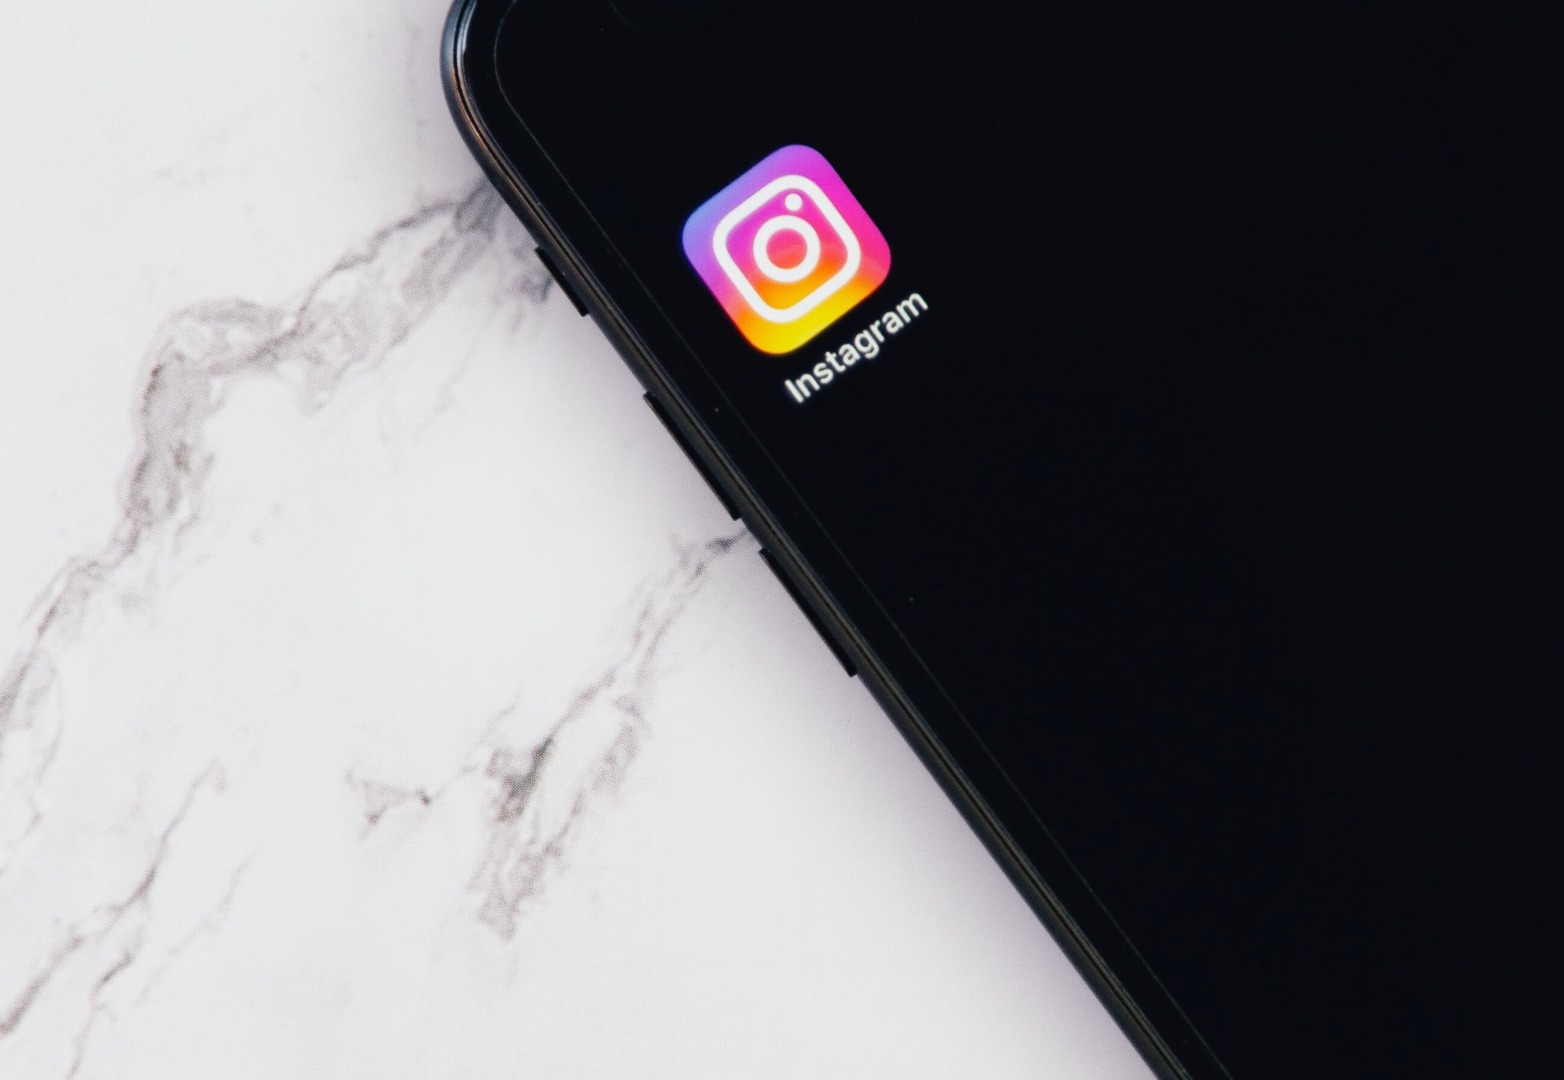 Unlink any third-party apps from your Instagram account.
Change your Instagram password to ensure security.